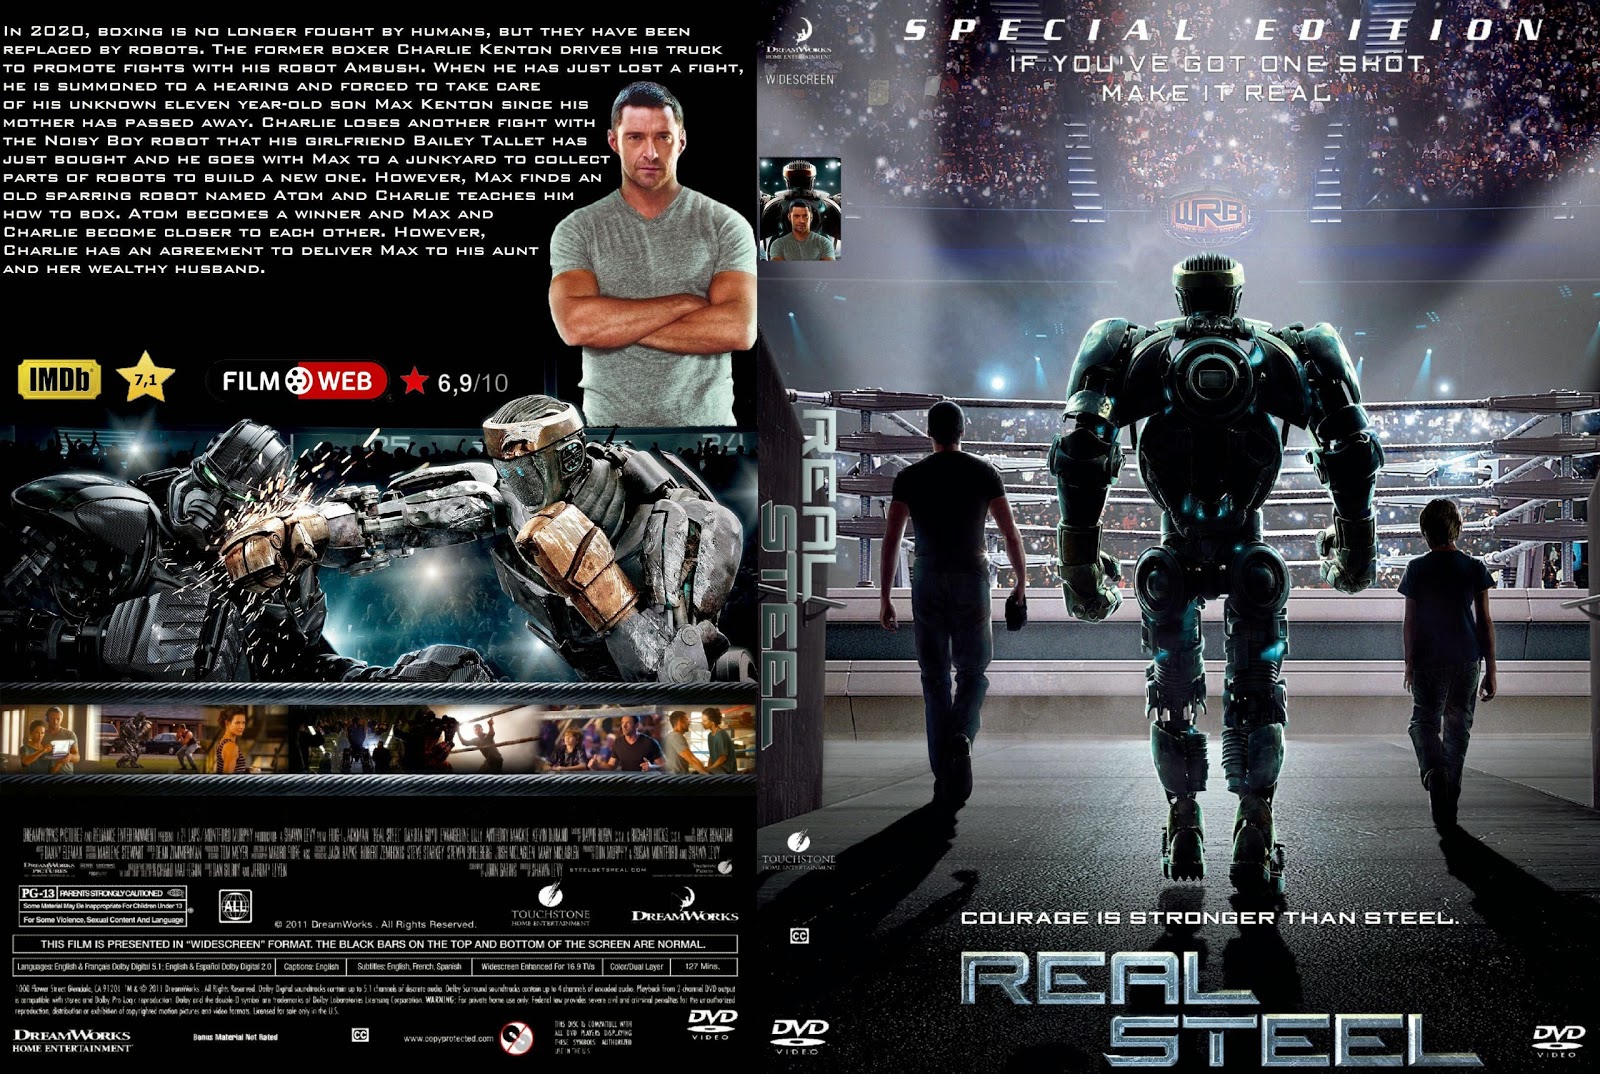 Capa DVD Real Steel Special Edition 